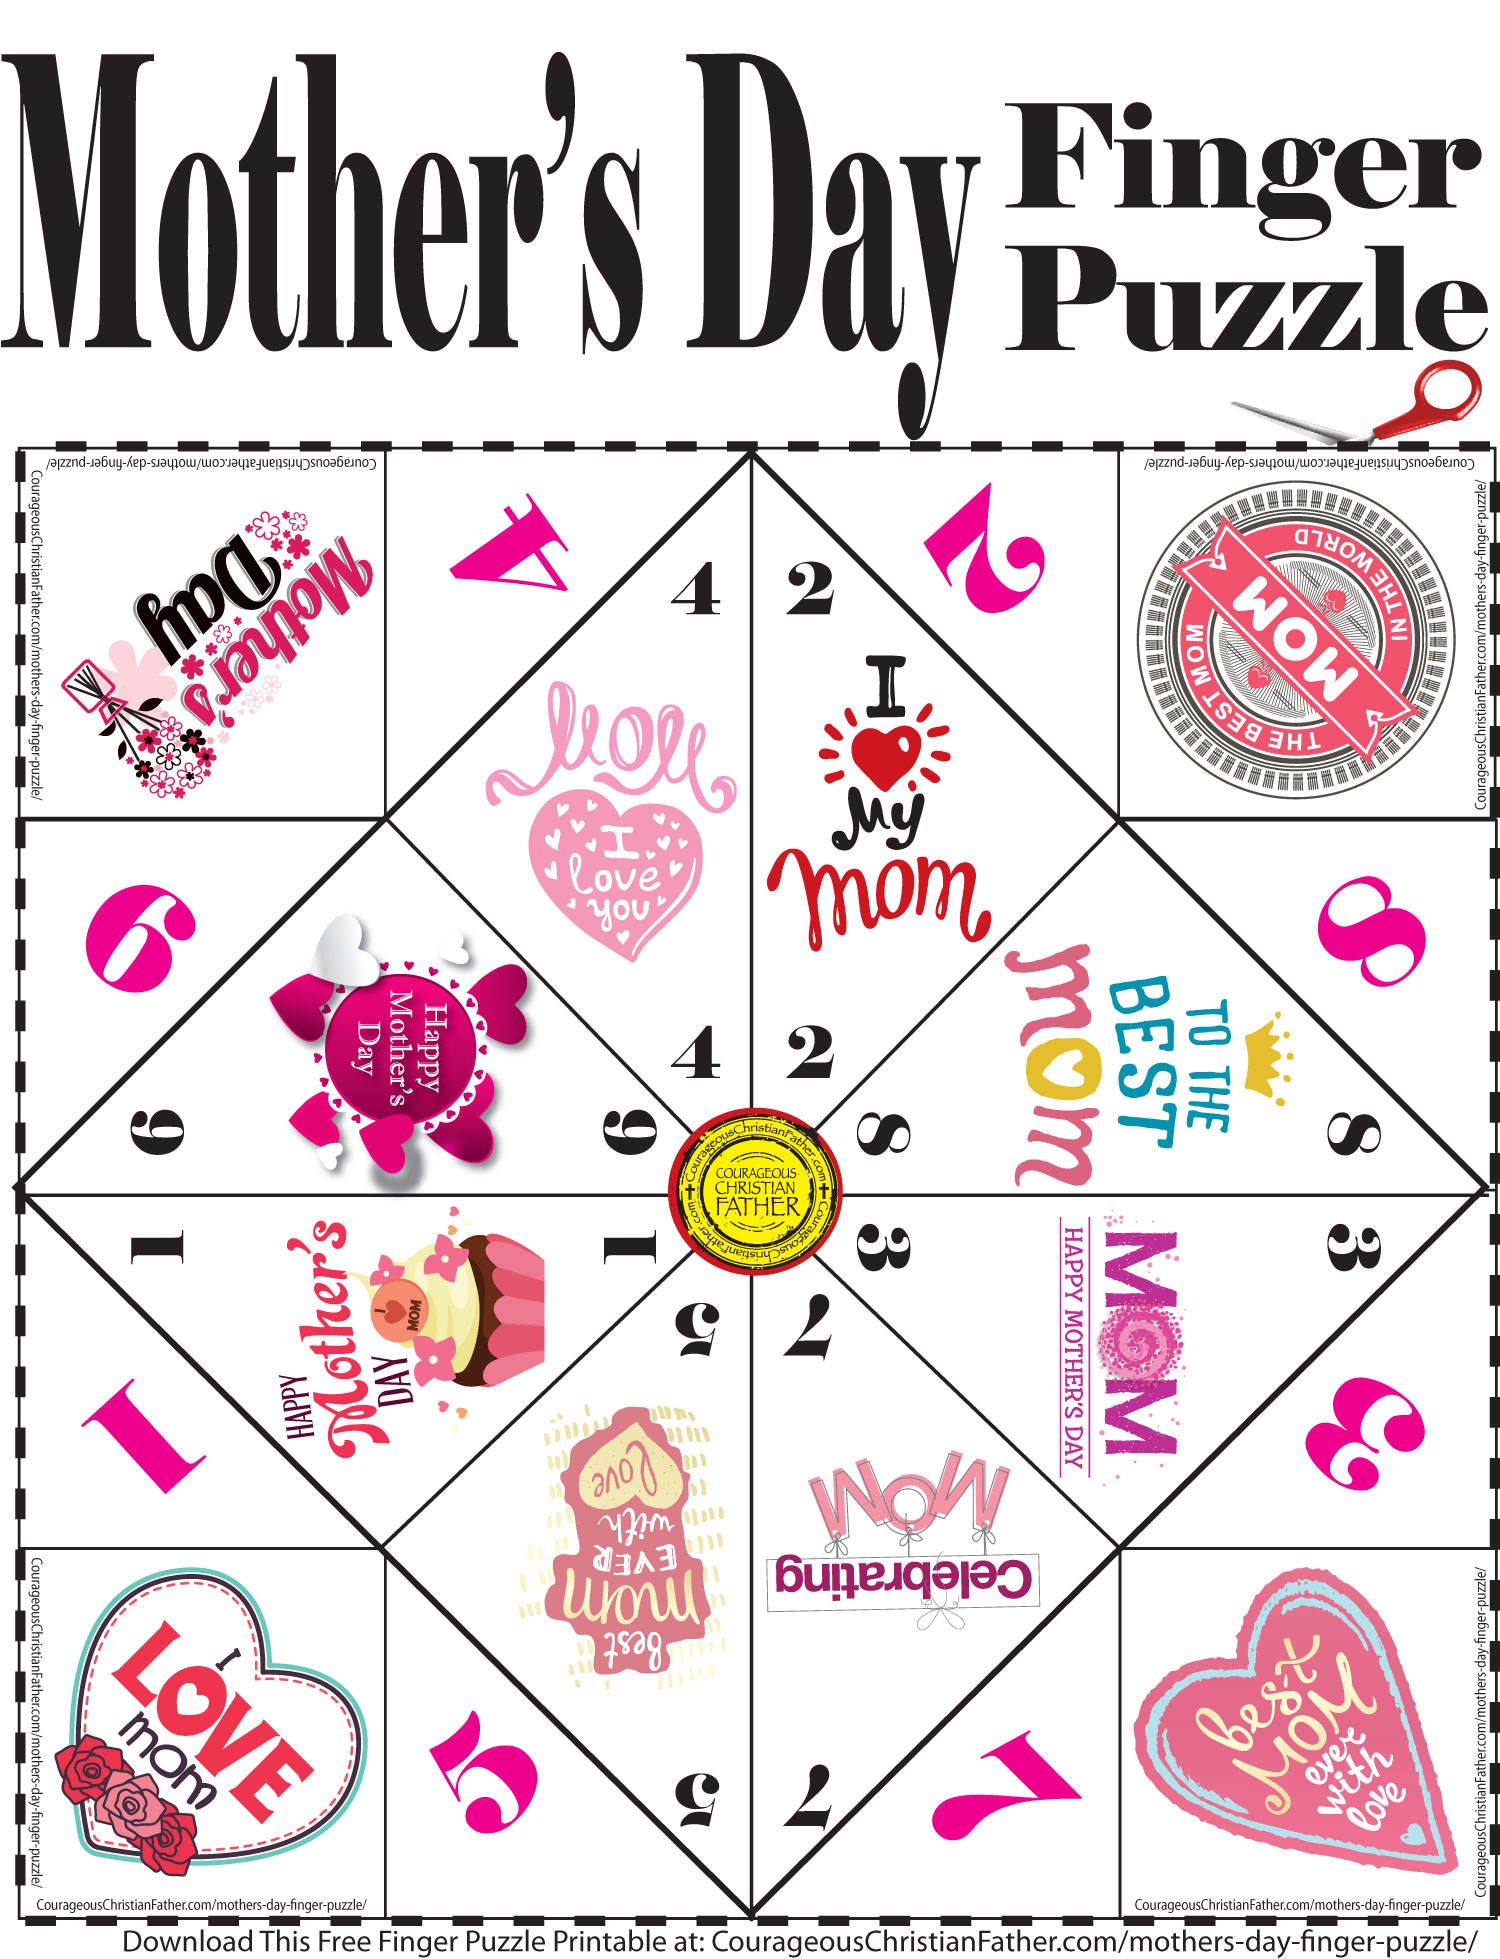 Mother's Day Finger Puzzle Printable - Here is a free finger puzzle printable just for Mother's Day! #MothersDay